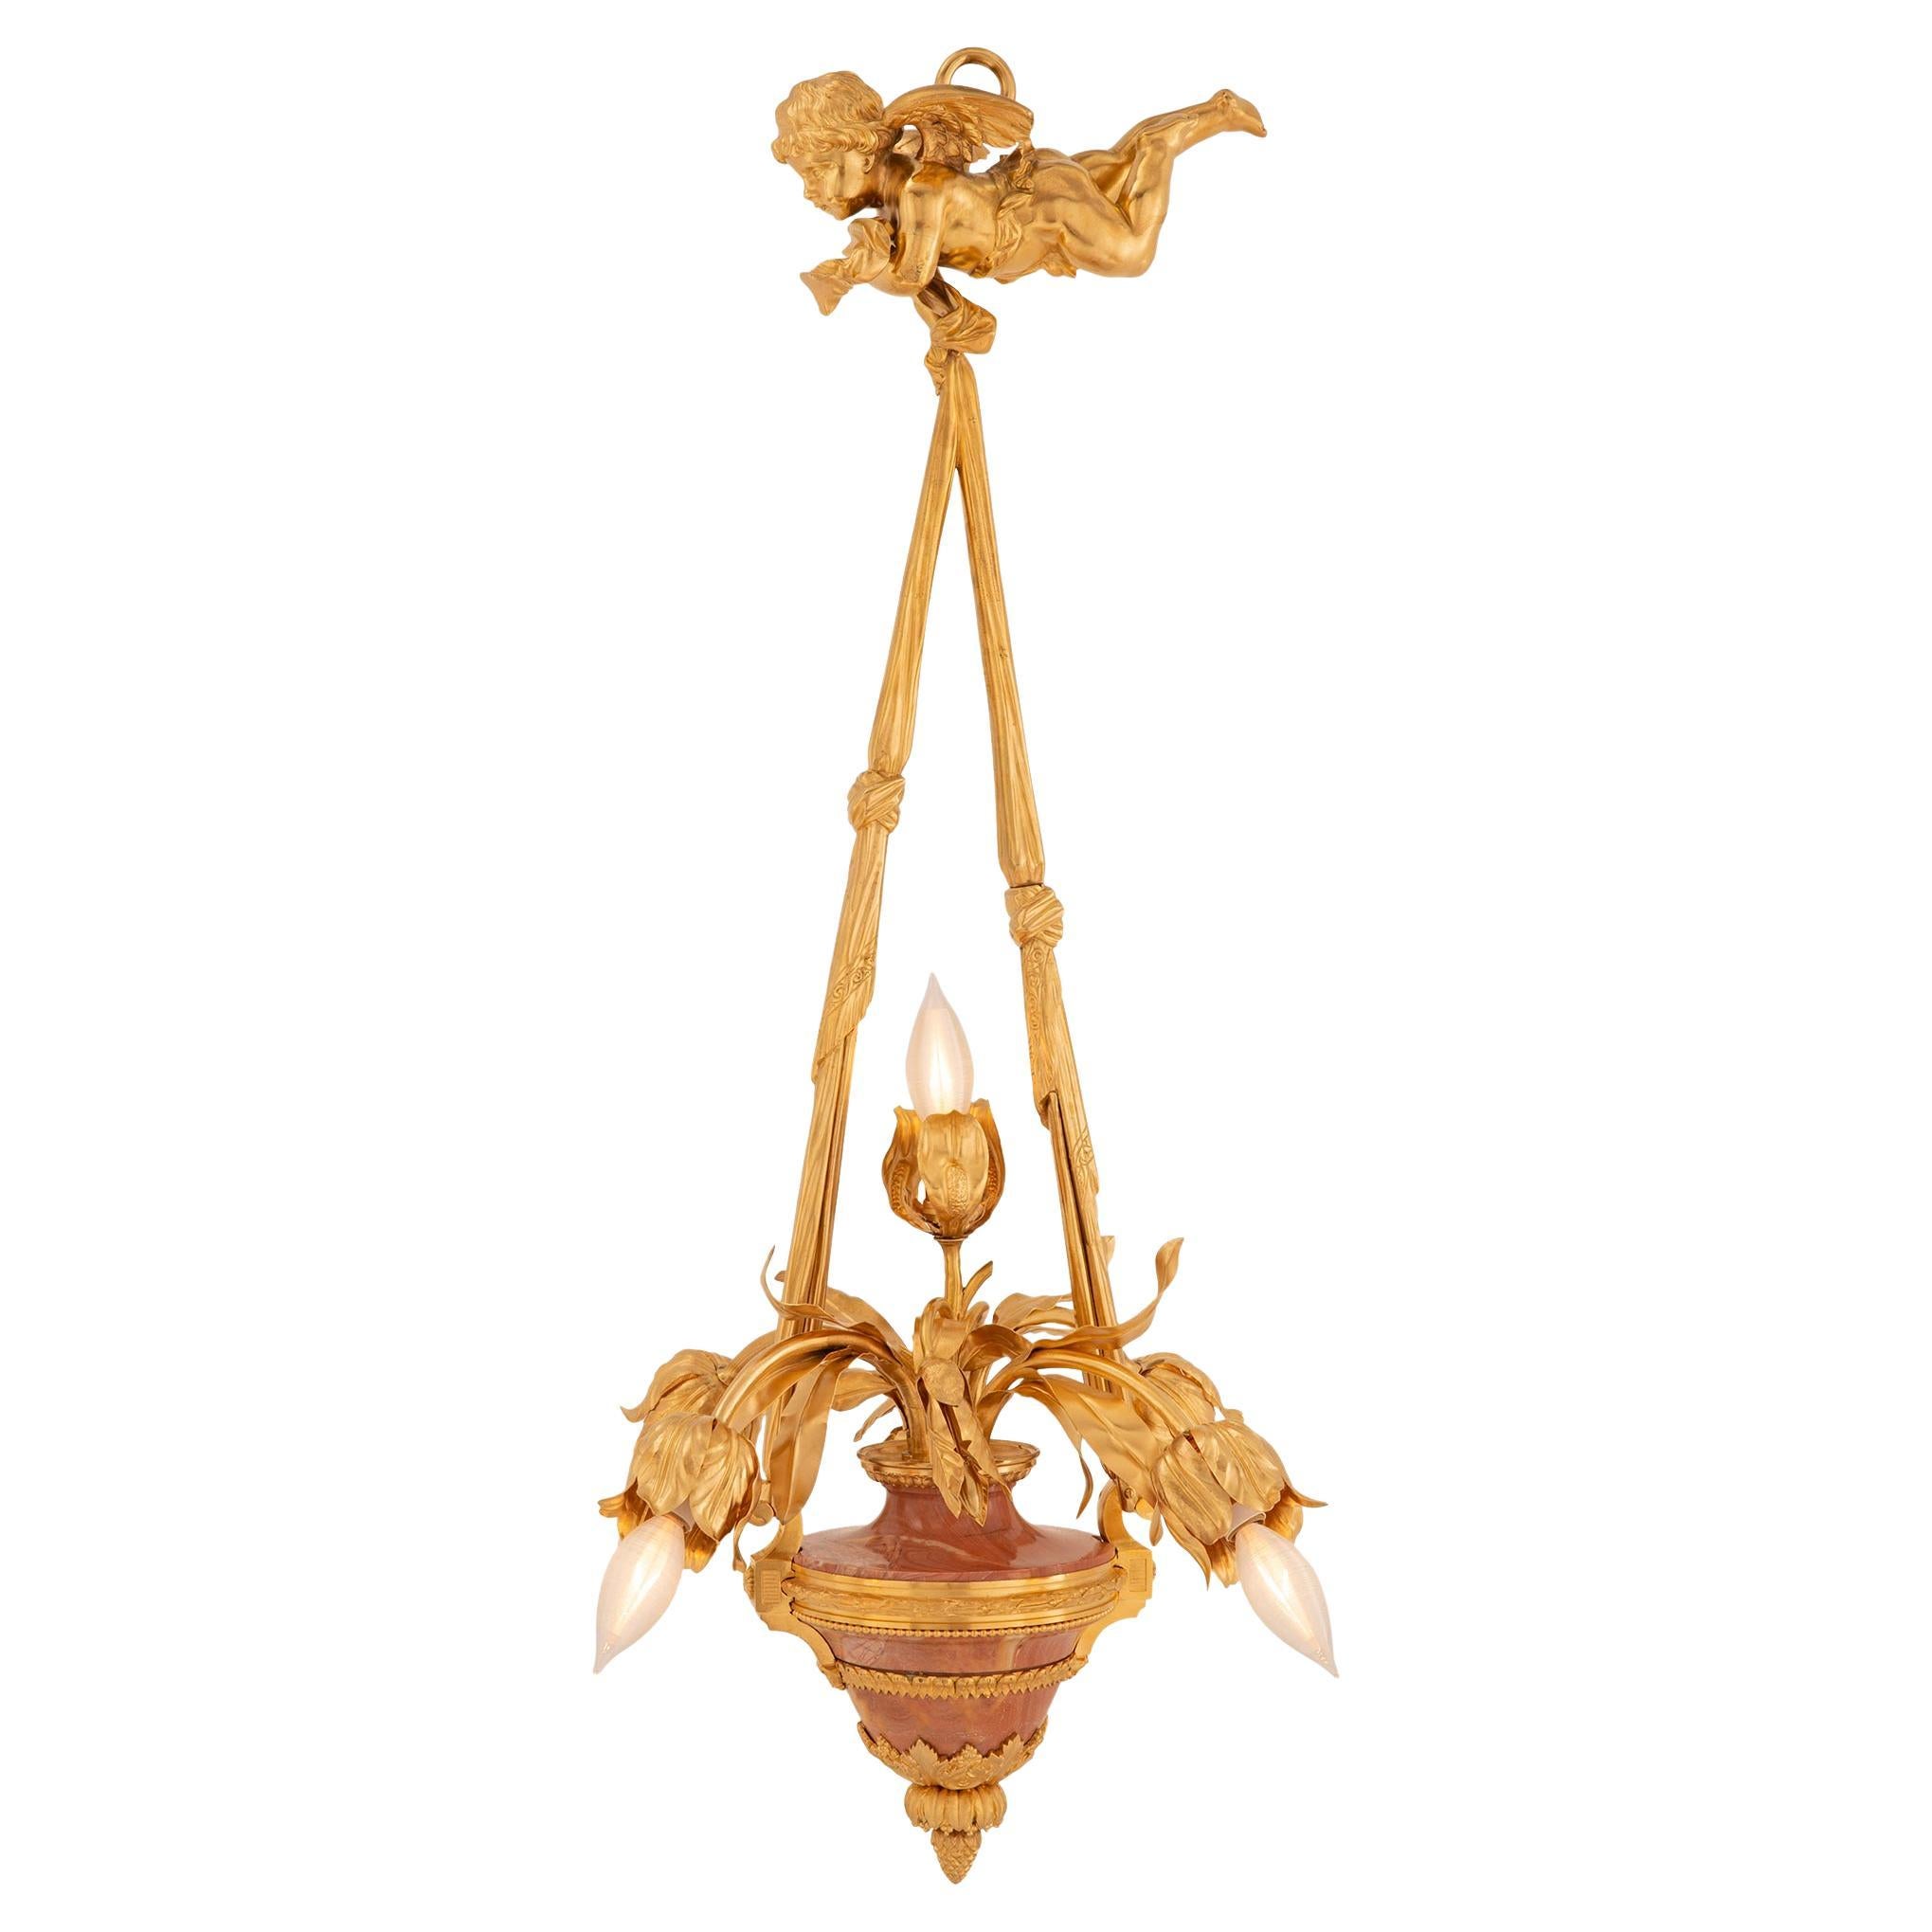 French 19th Century Louis XVI Belle Époque Period Ormolu And Marble Chandelier